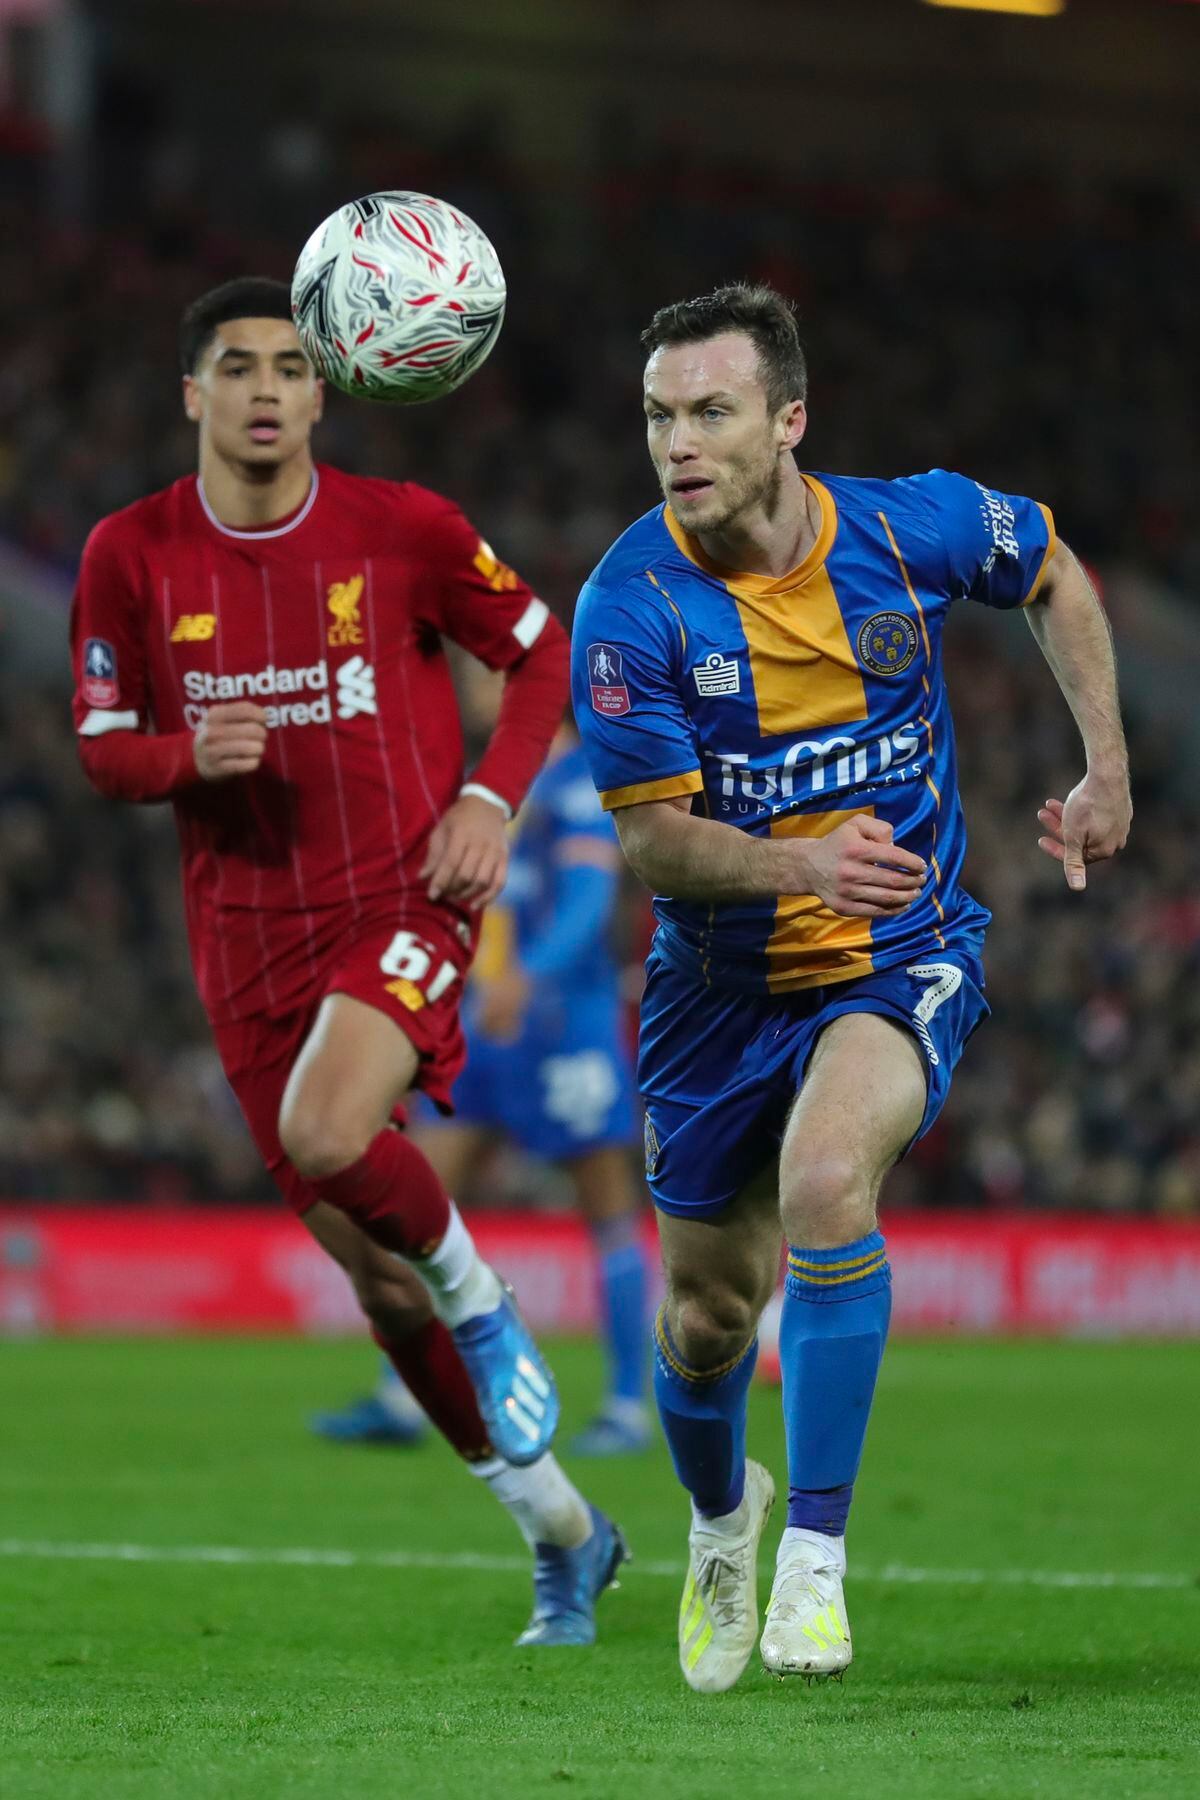 Shaun Whalley picked up a hamstring injury in Shrewsbury's FA Cup tie at Anfield earlier this month (AMA)